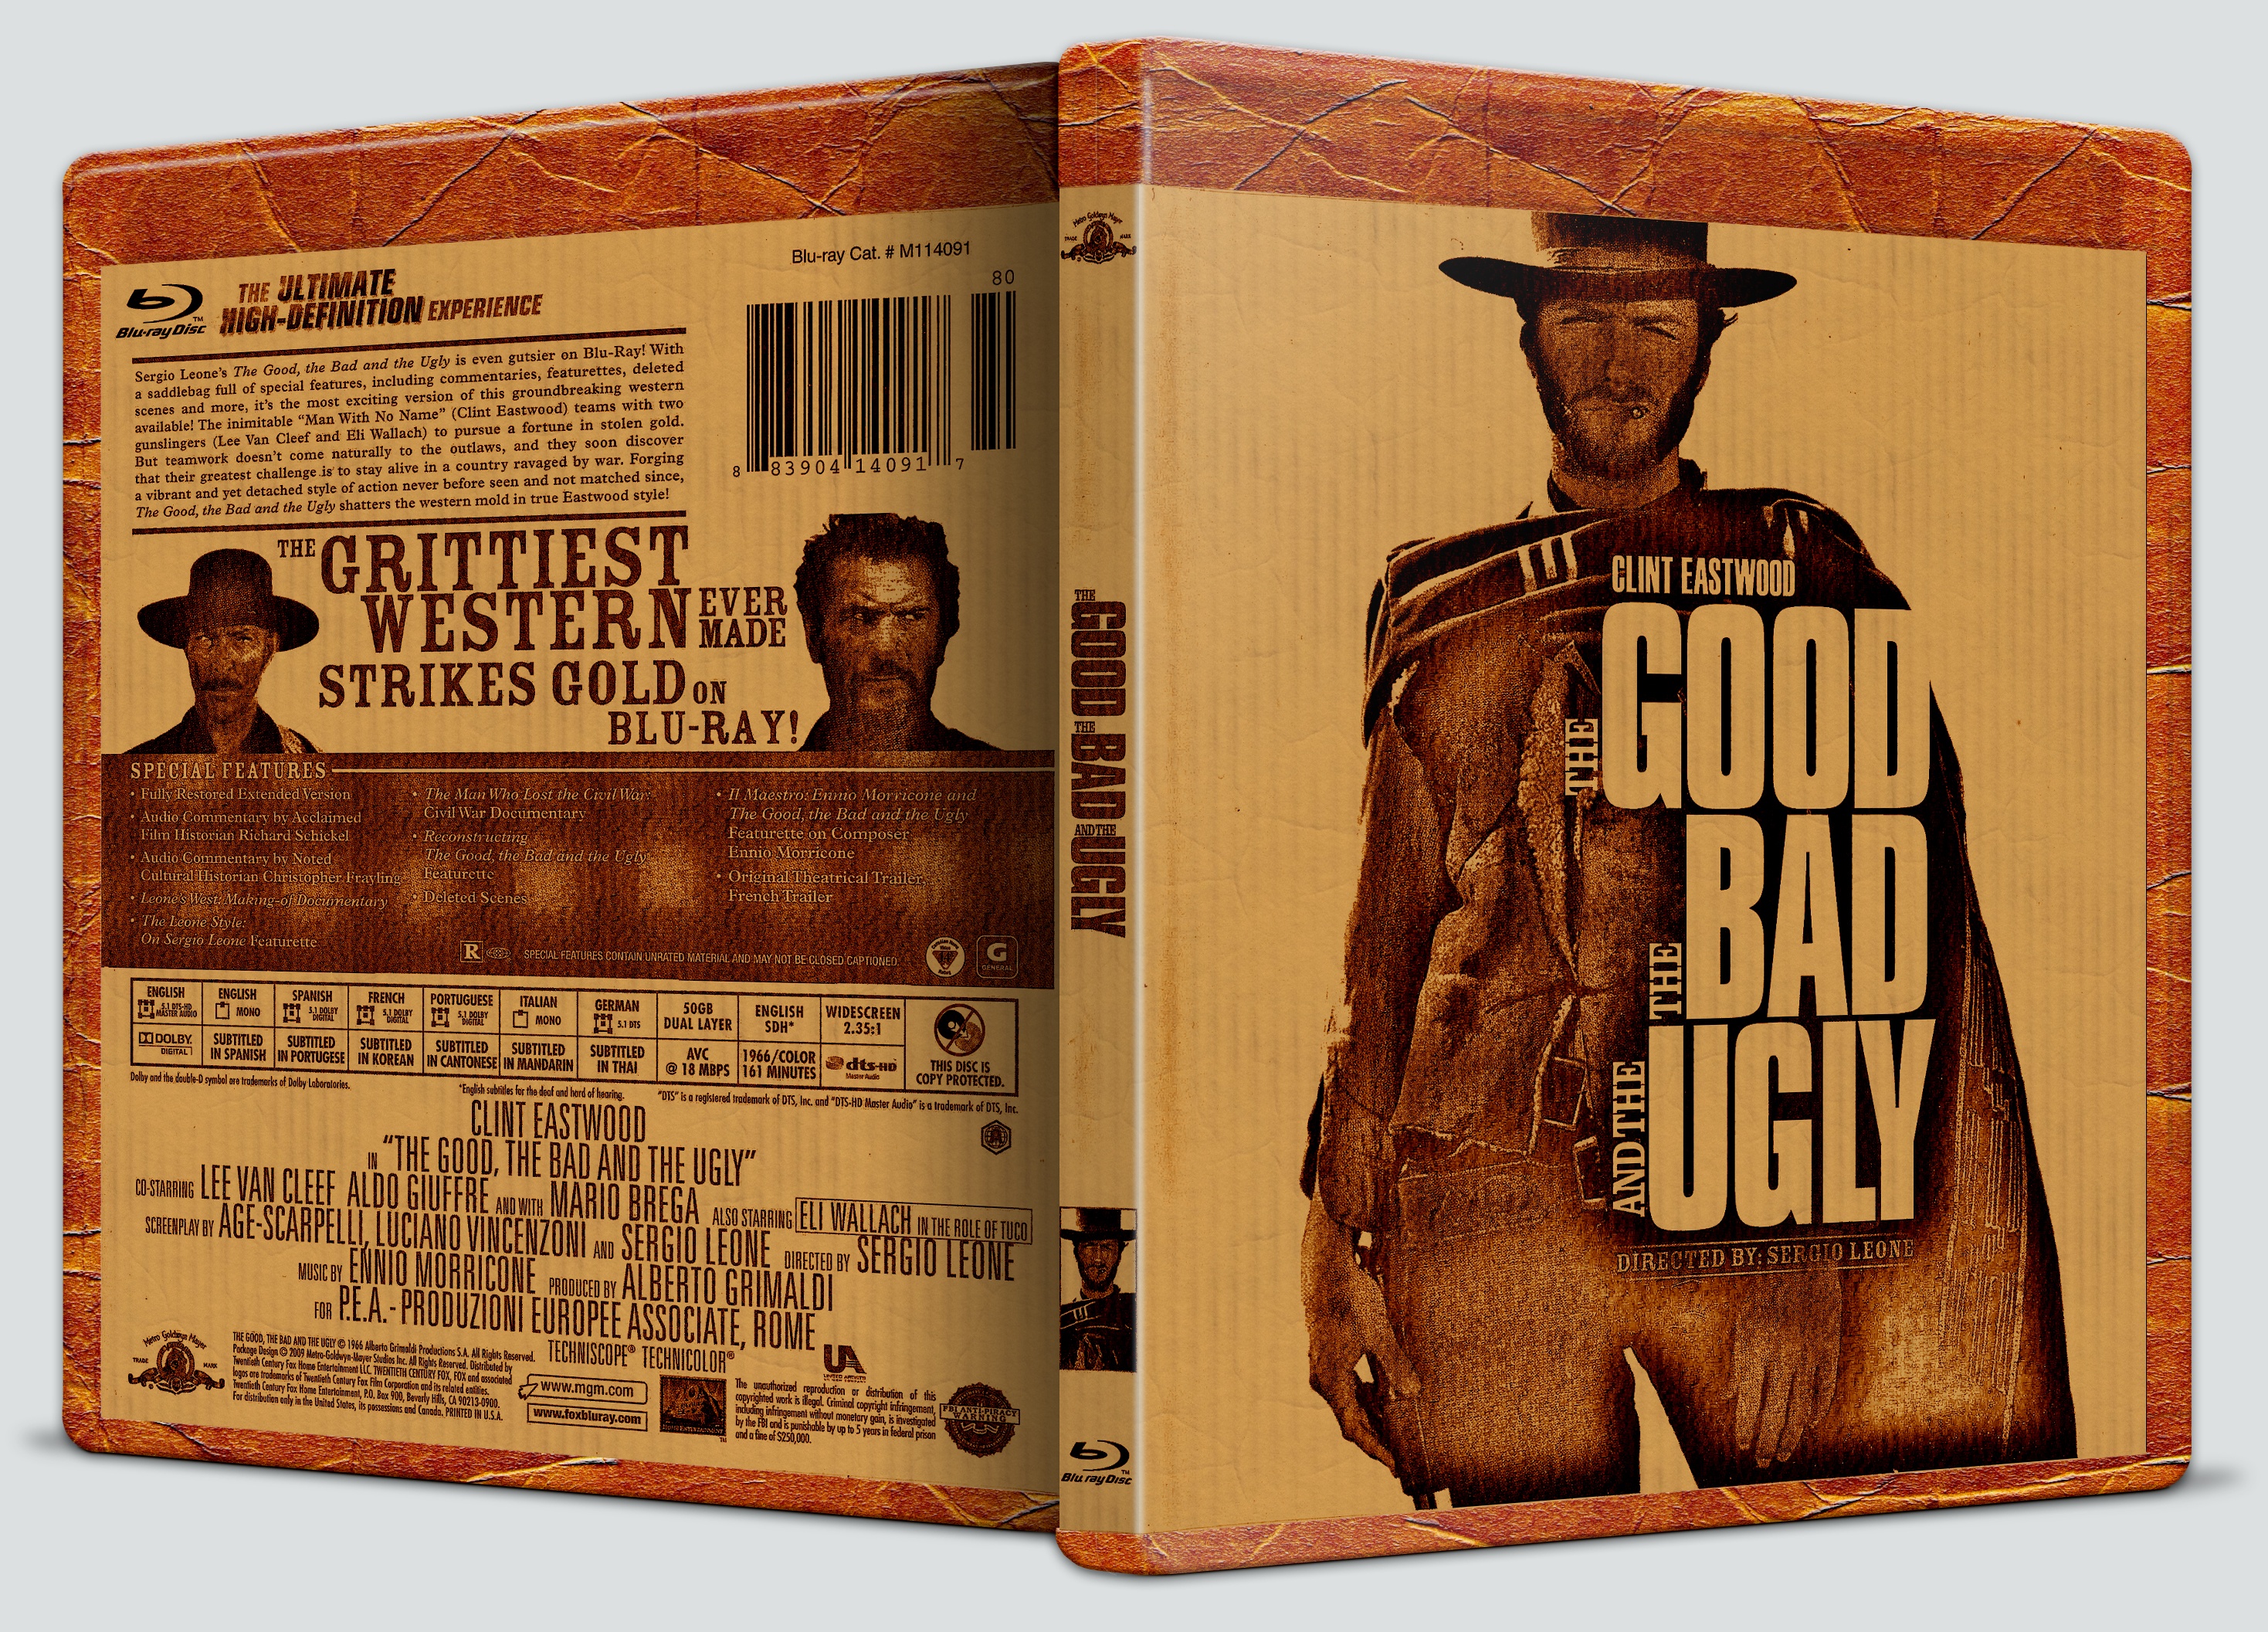 The good the bad and the ugly box cover